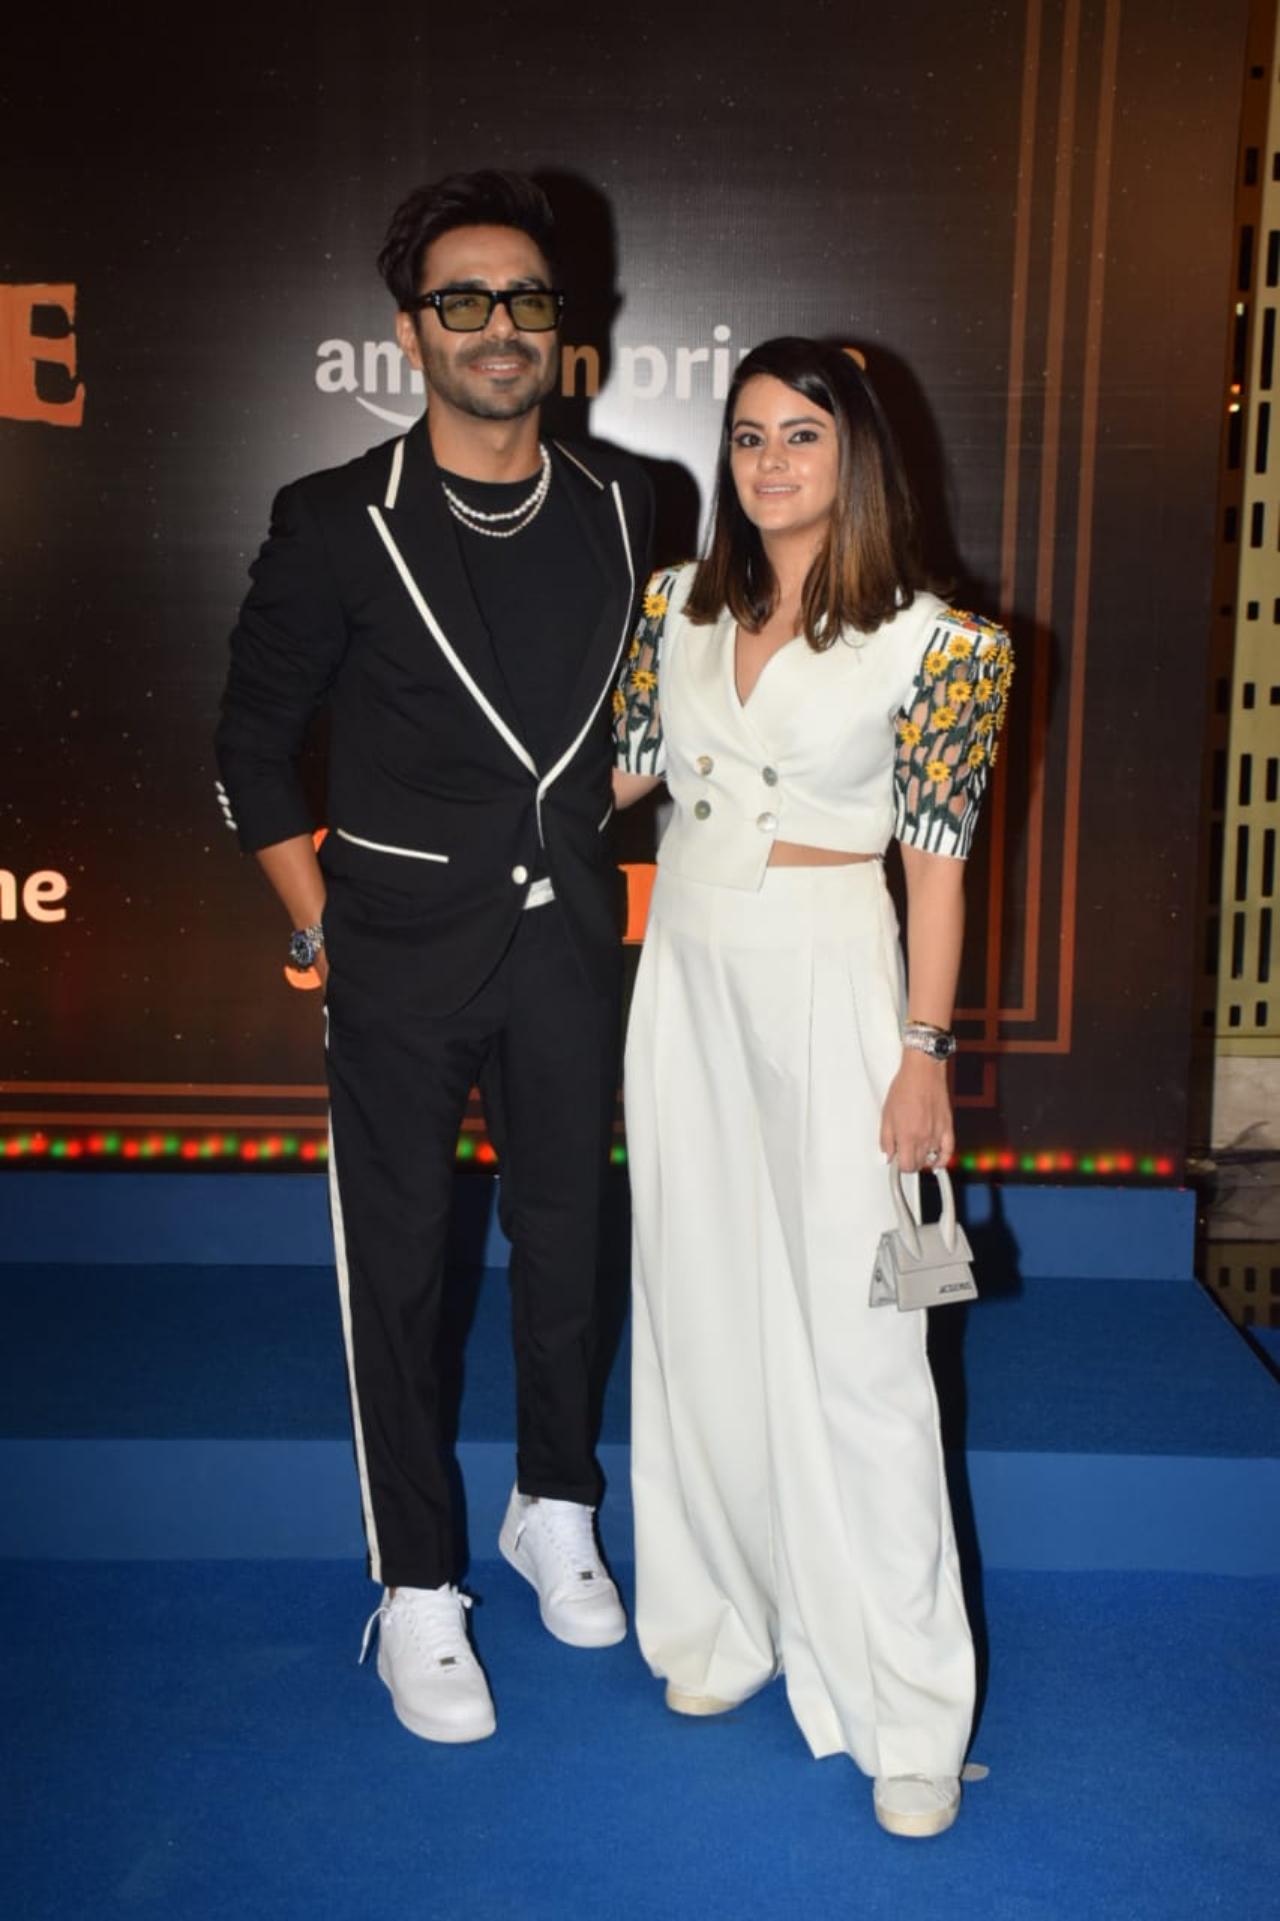 Aparshakti Khurana, who is one of the leads of the show, arrived with his wife for the premiere